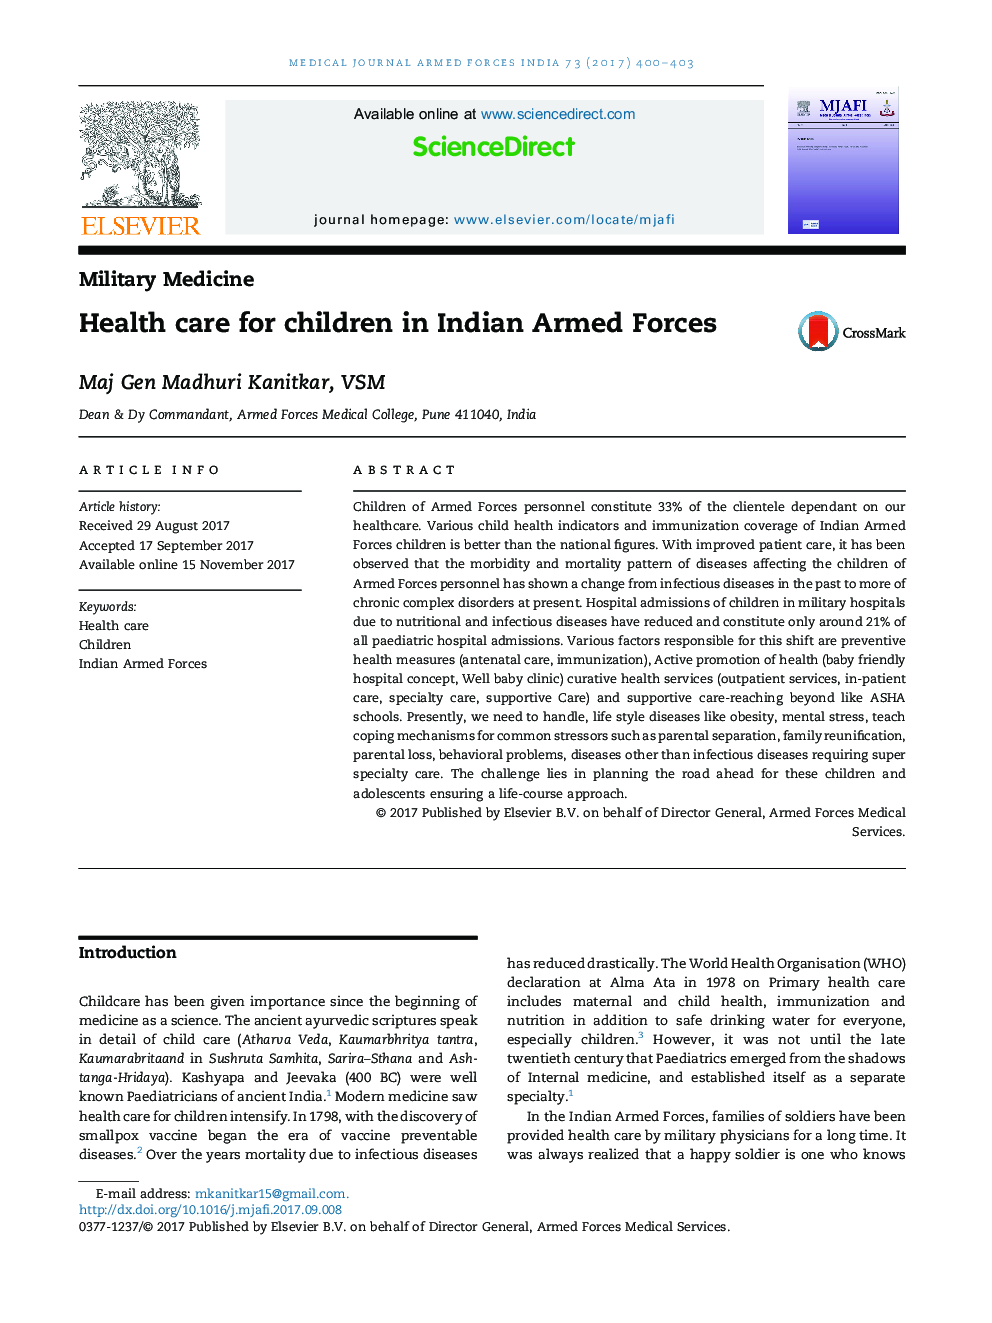 Health care for children in Indian Armed Forces